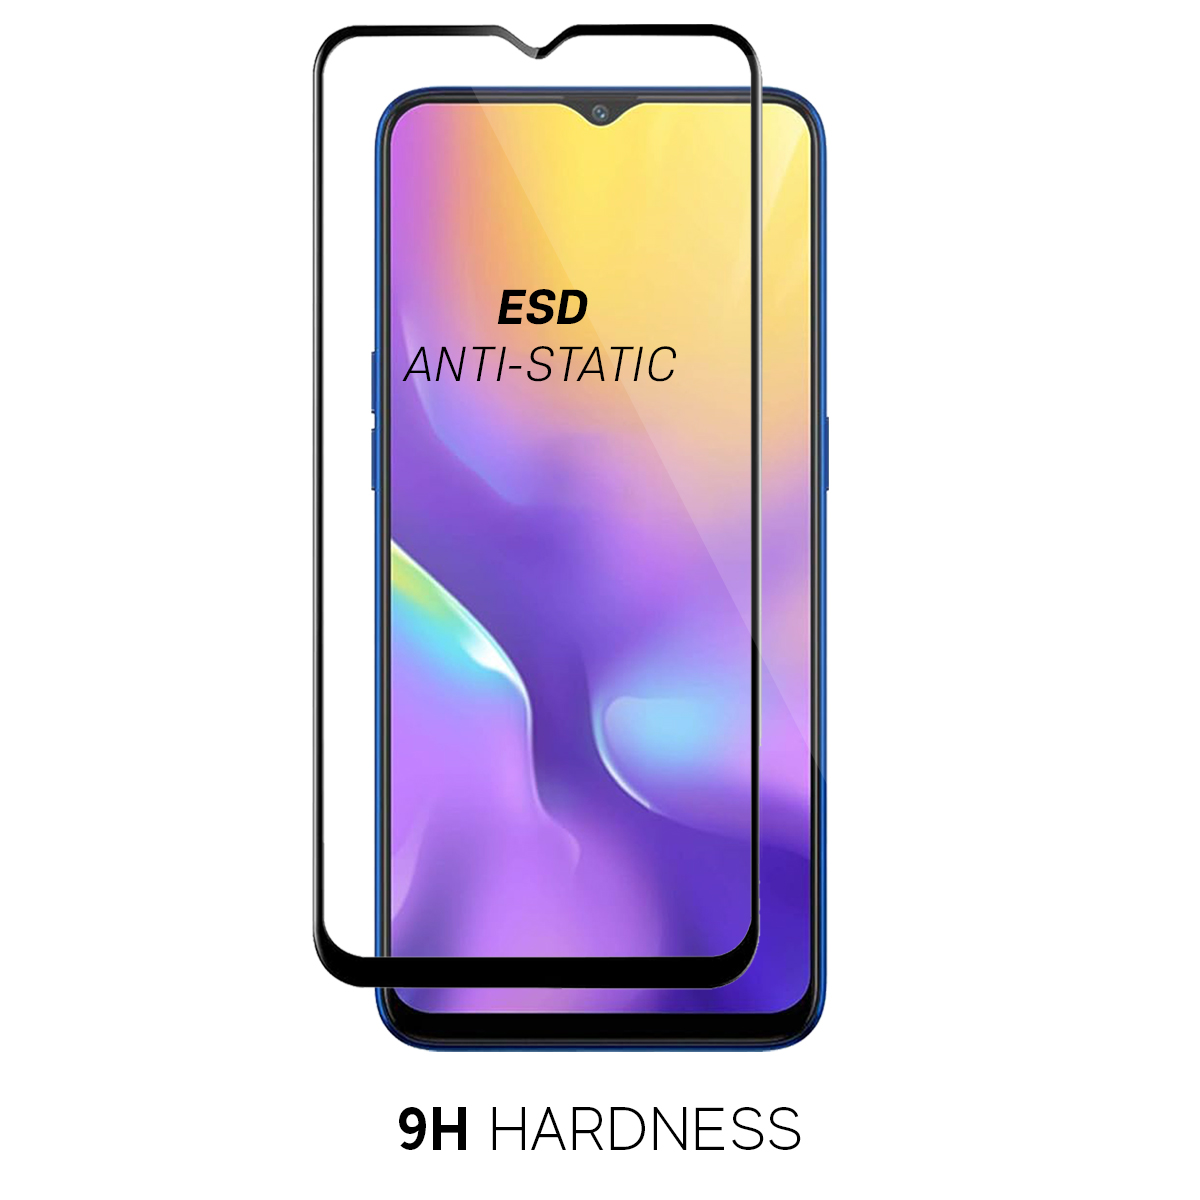 Beyox ESD Anti Static 5D Glass for Samsung A11